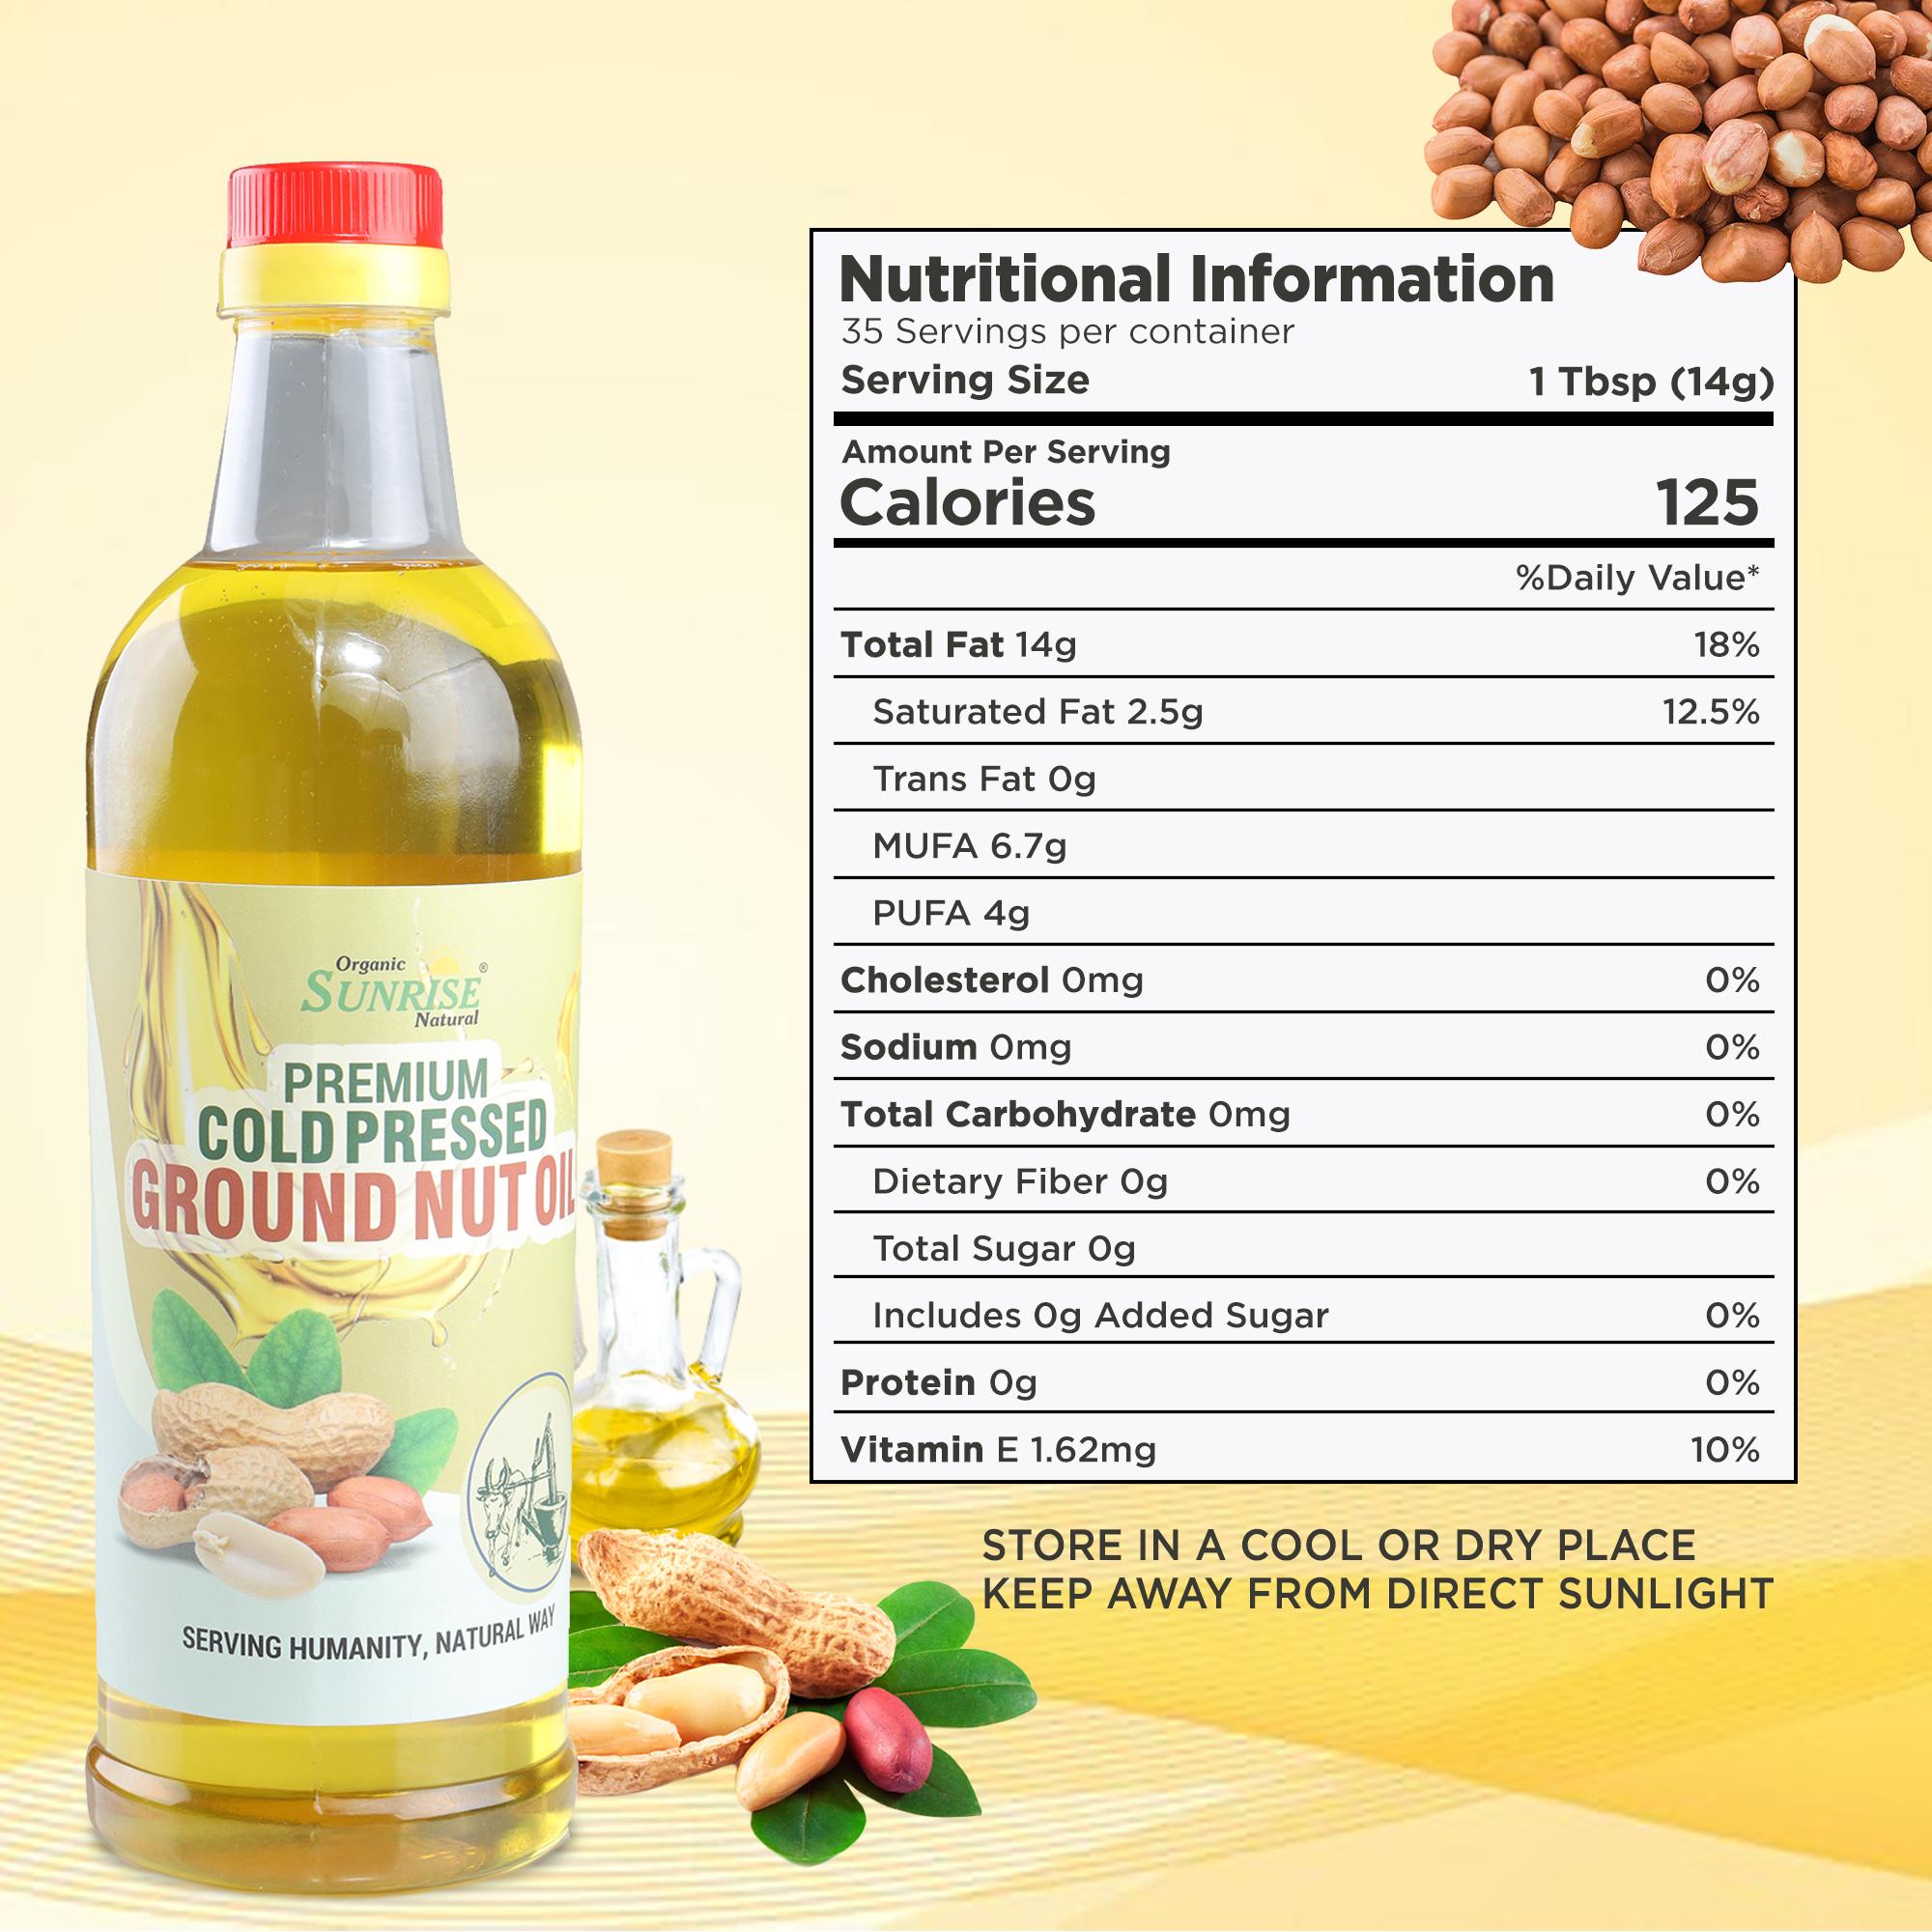 Vegetable Natural Oil Combo